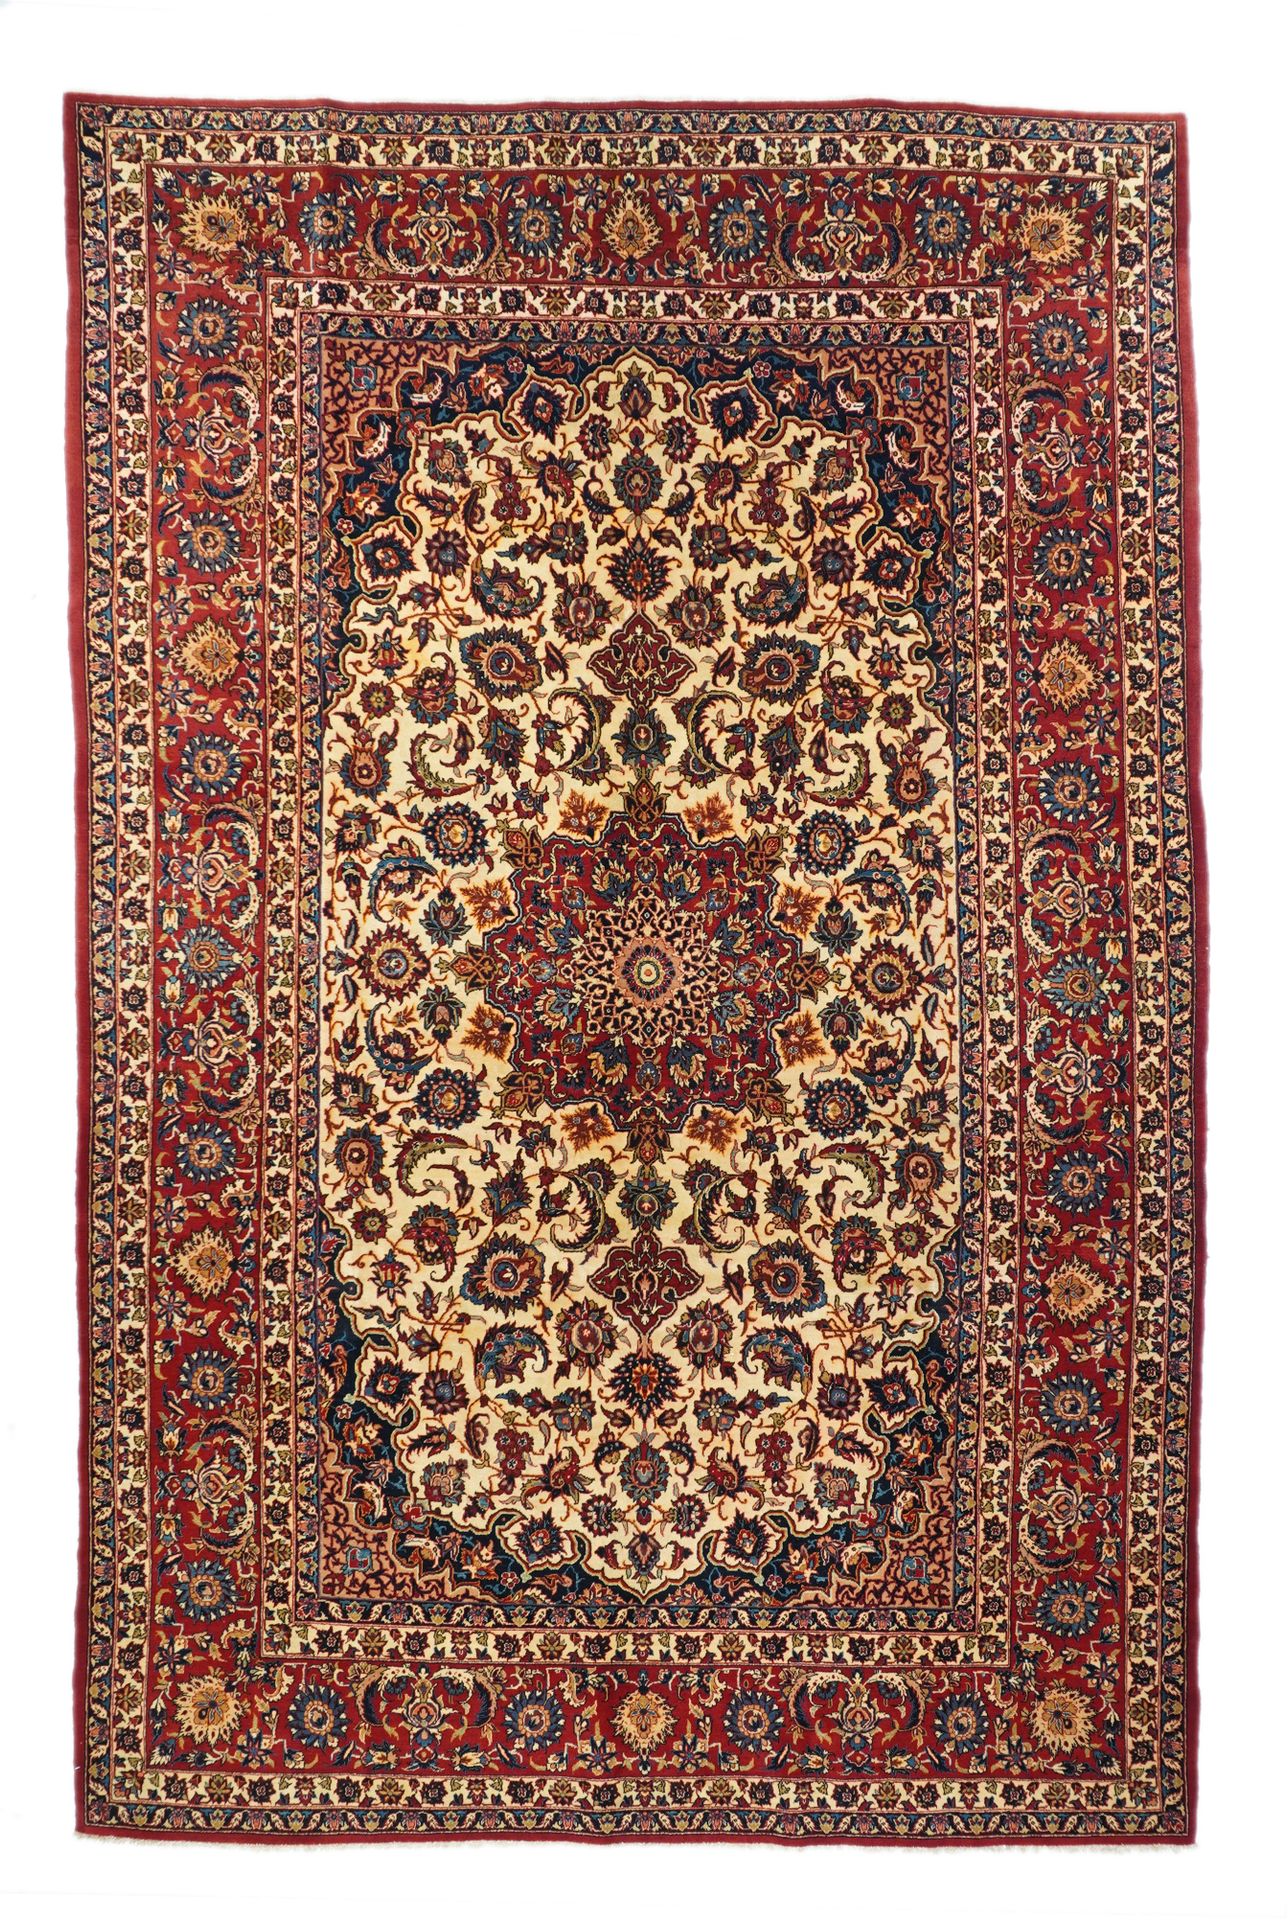 Null Isfahan-Teppich, 6'10'' x 11'